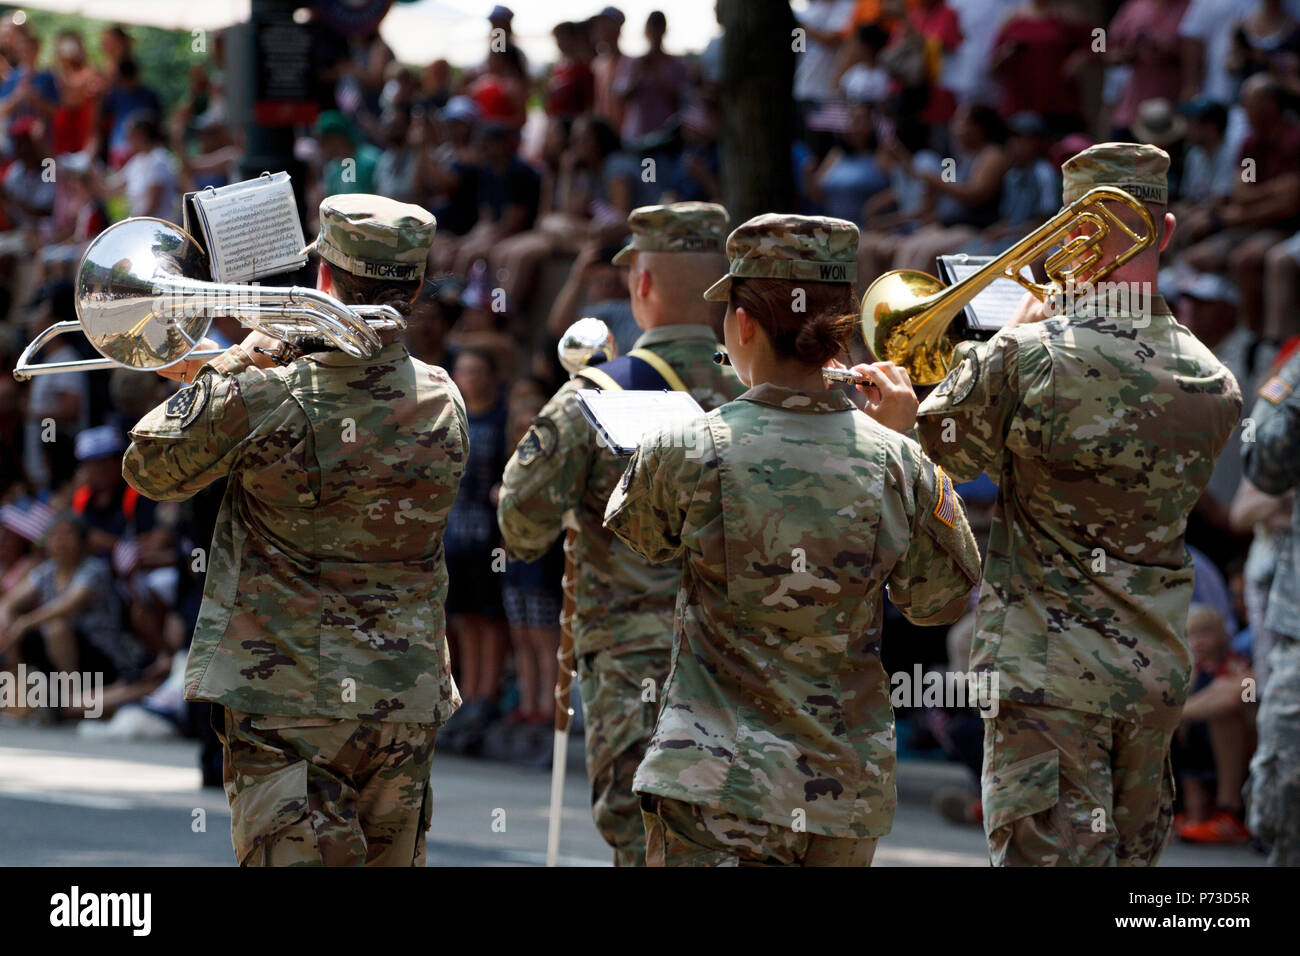 Philadelphia, PA, USA. 4th July, 2018. Members of a military band play in the Independence Day Parade through the city's historic district. Credit: Michael Candelori/ZUMA Wire/Alamy Live News Stock Photo